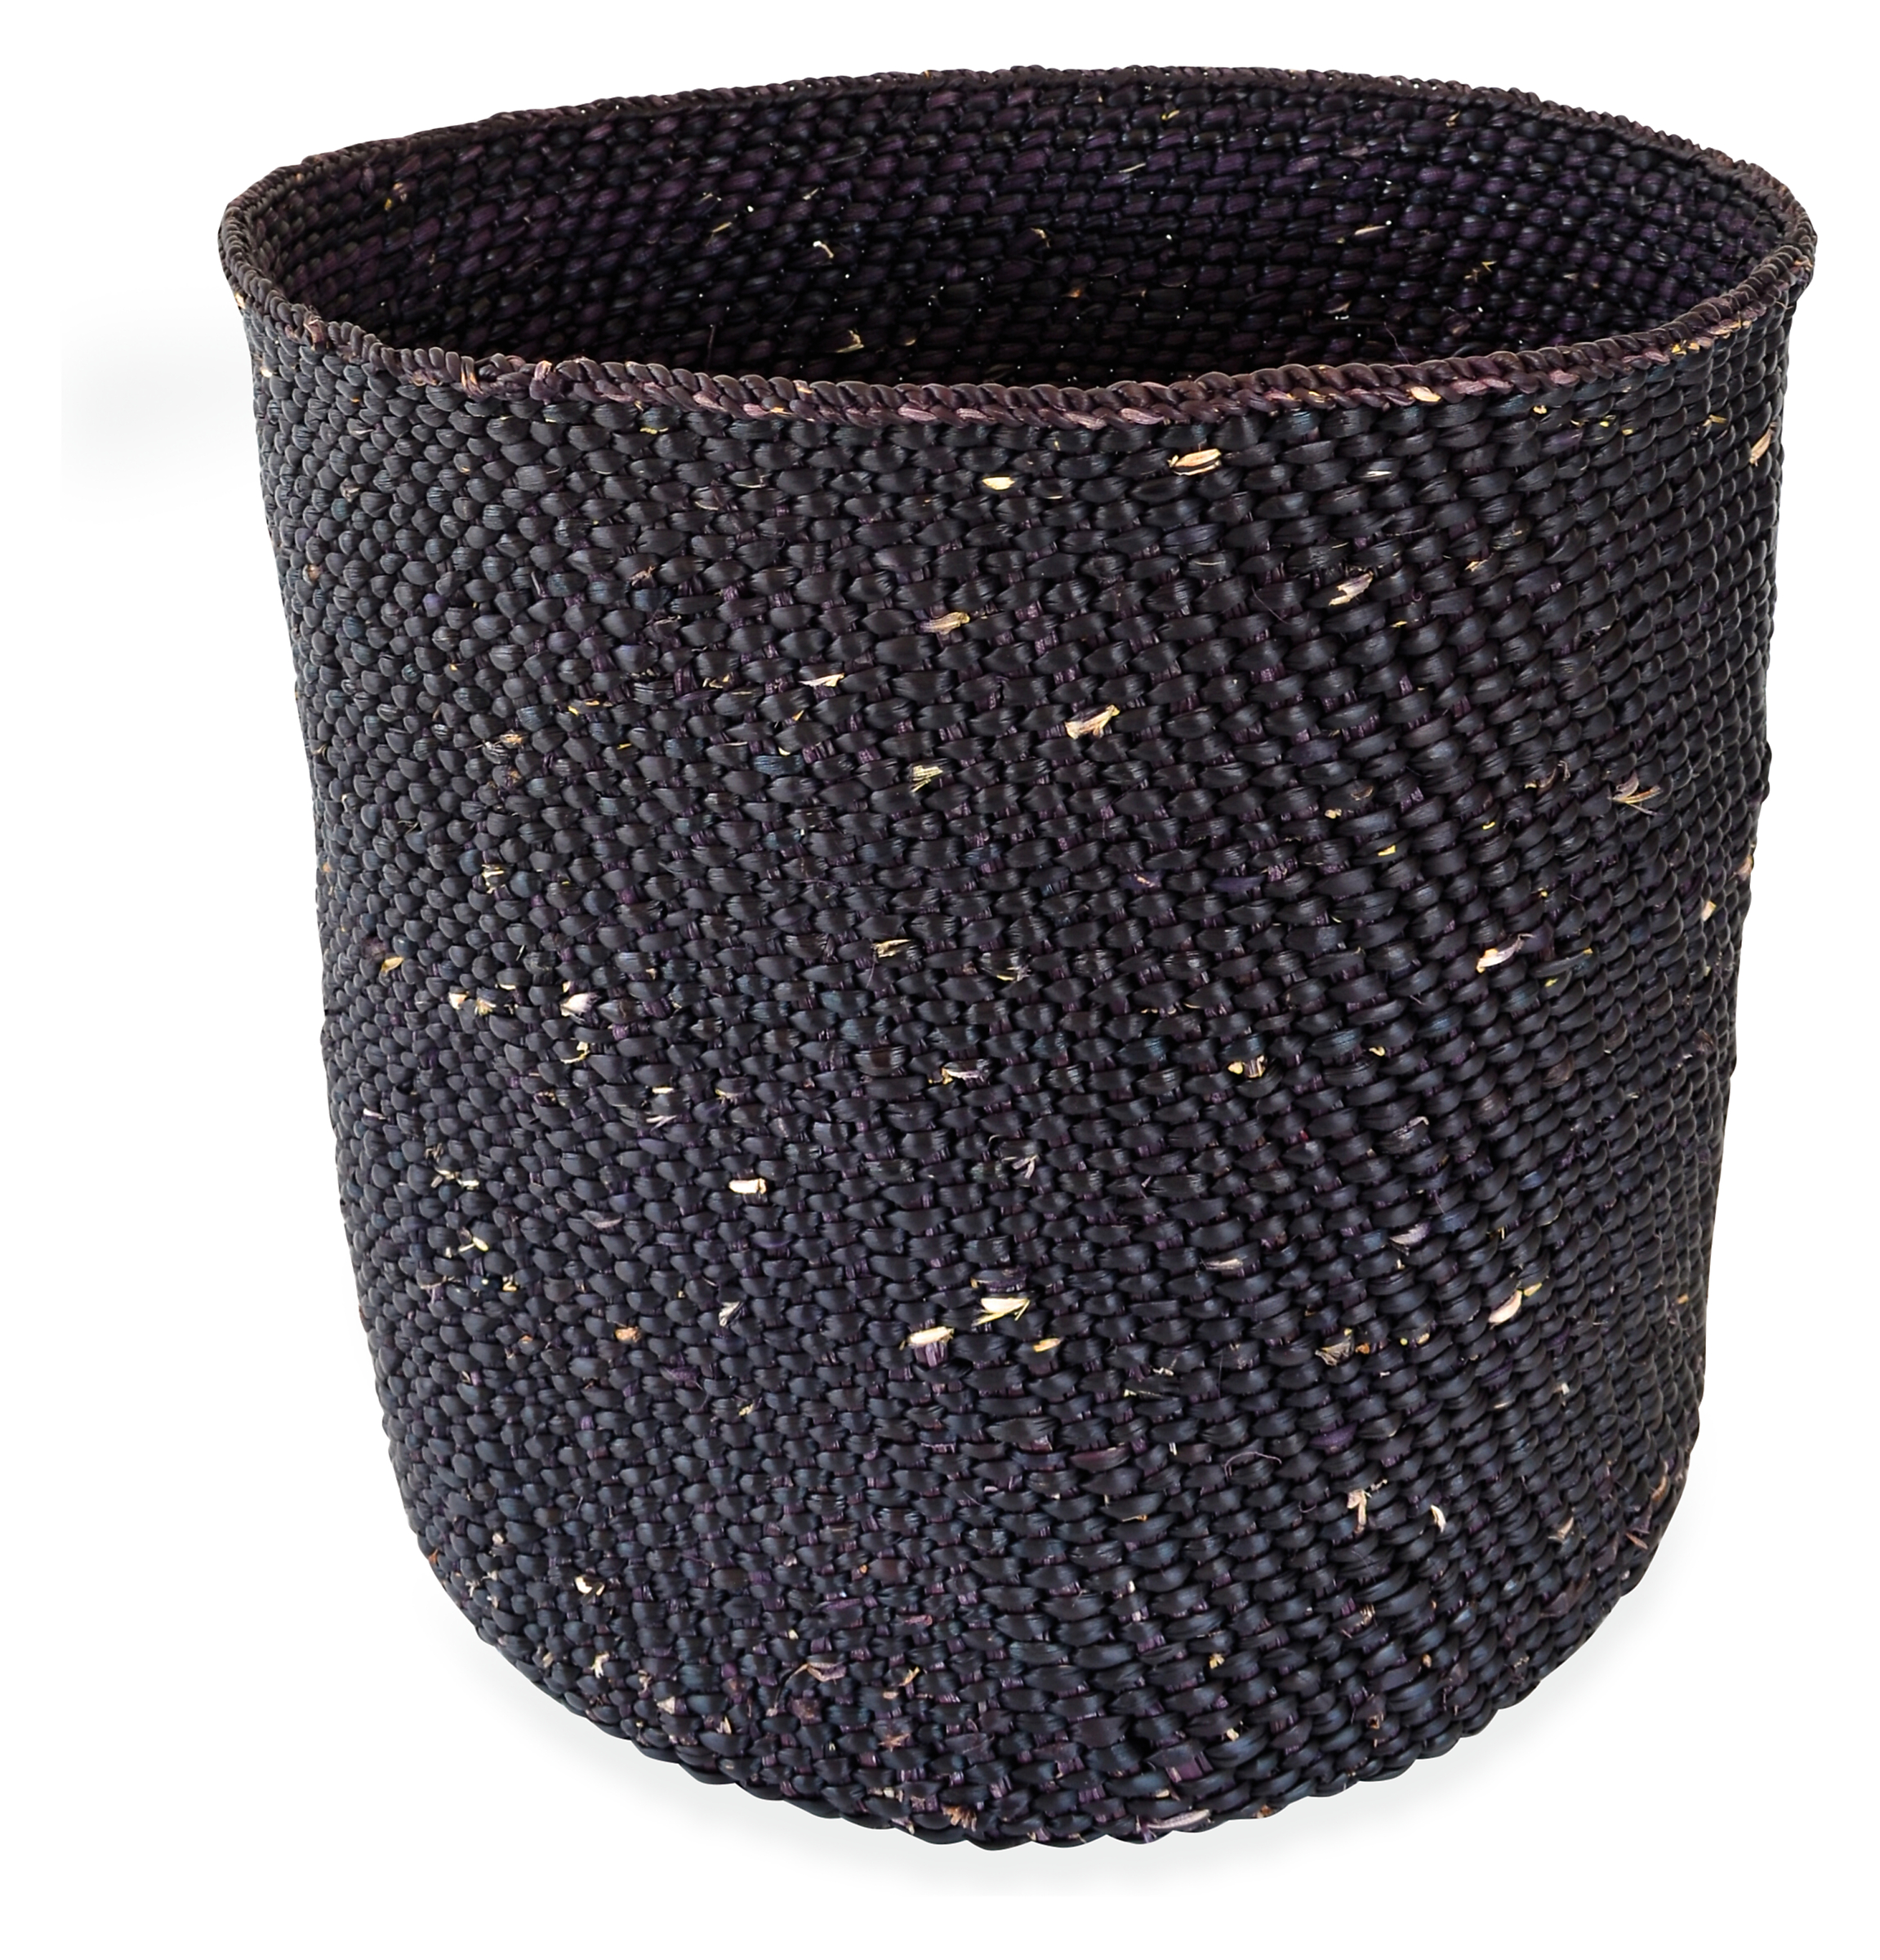 Wasa Large Basket in Midnight